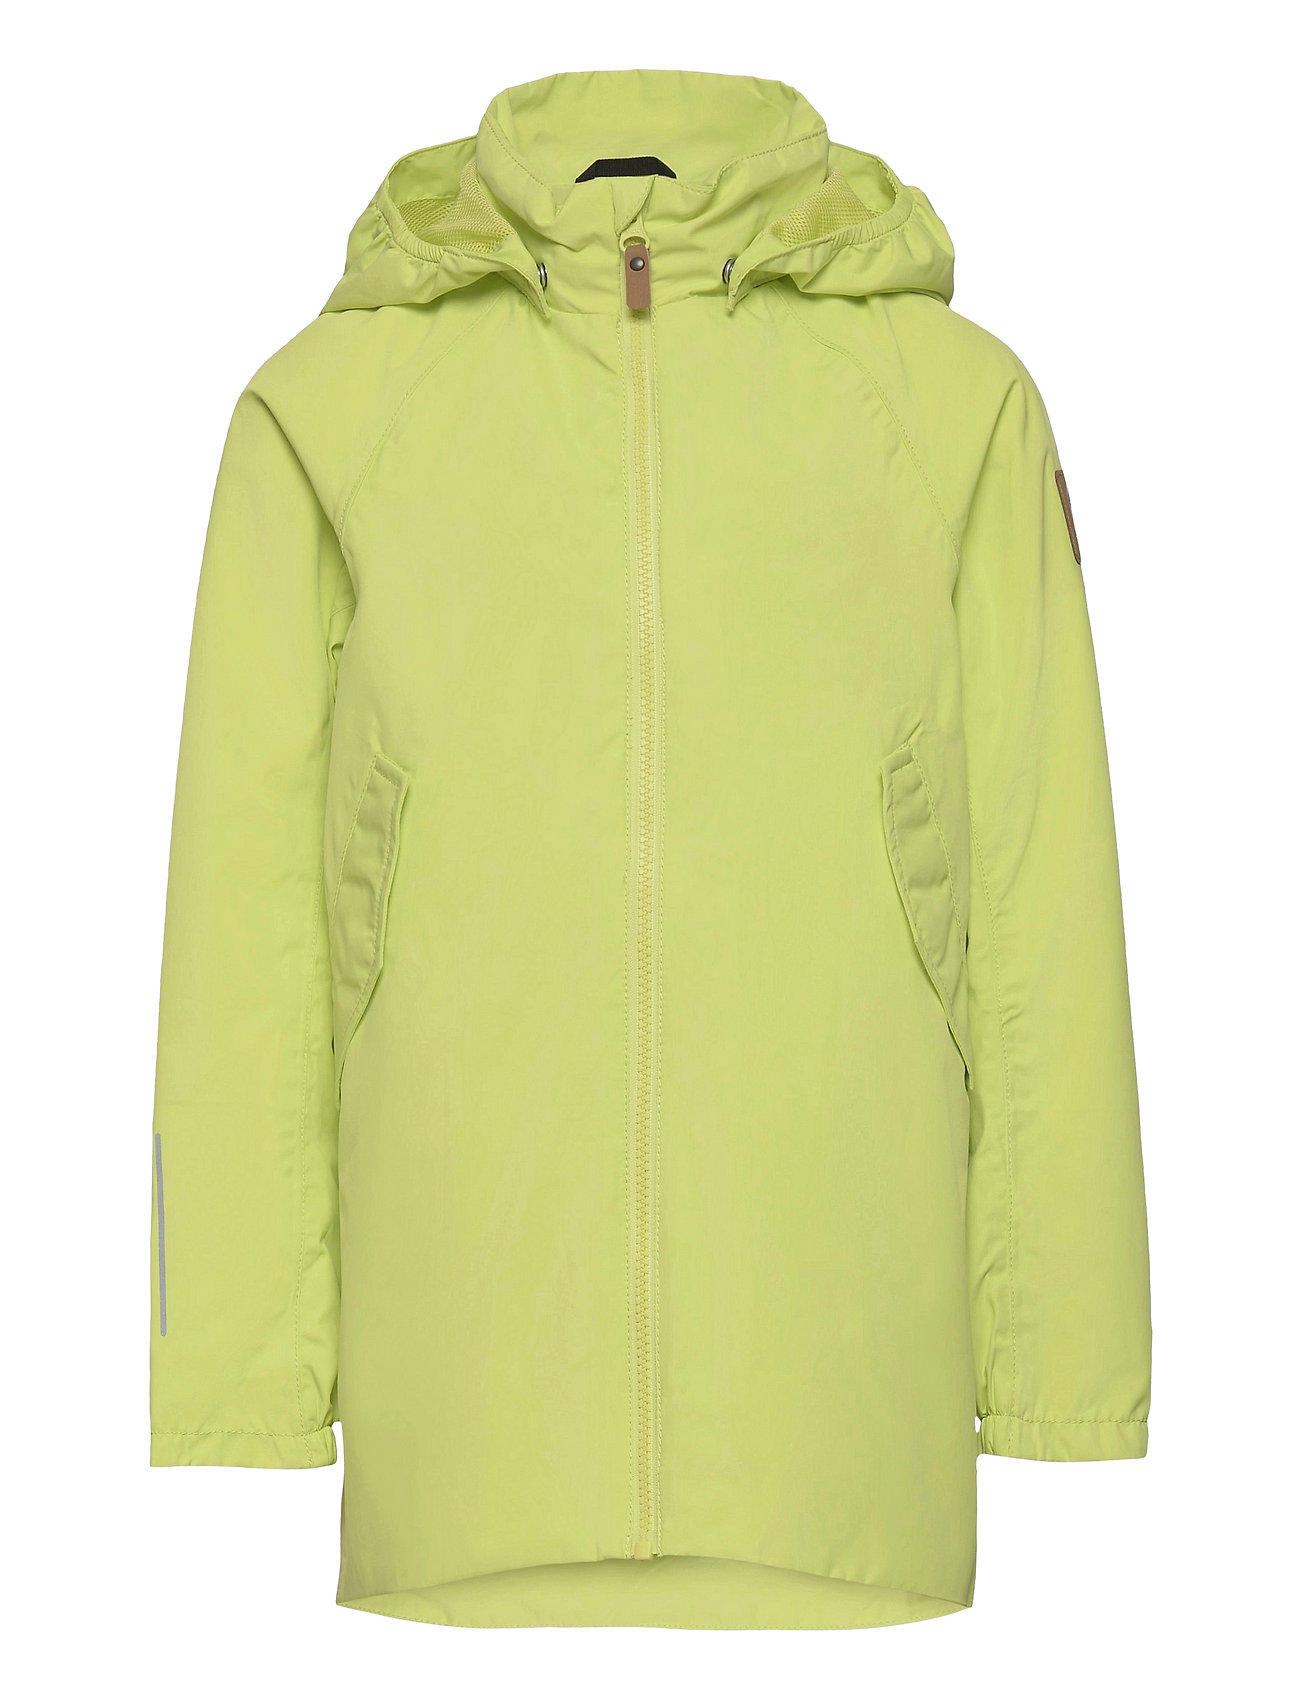 Galtby Outerwear Shell Clothing Shell Jacket Vihreä Reima